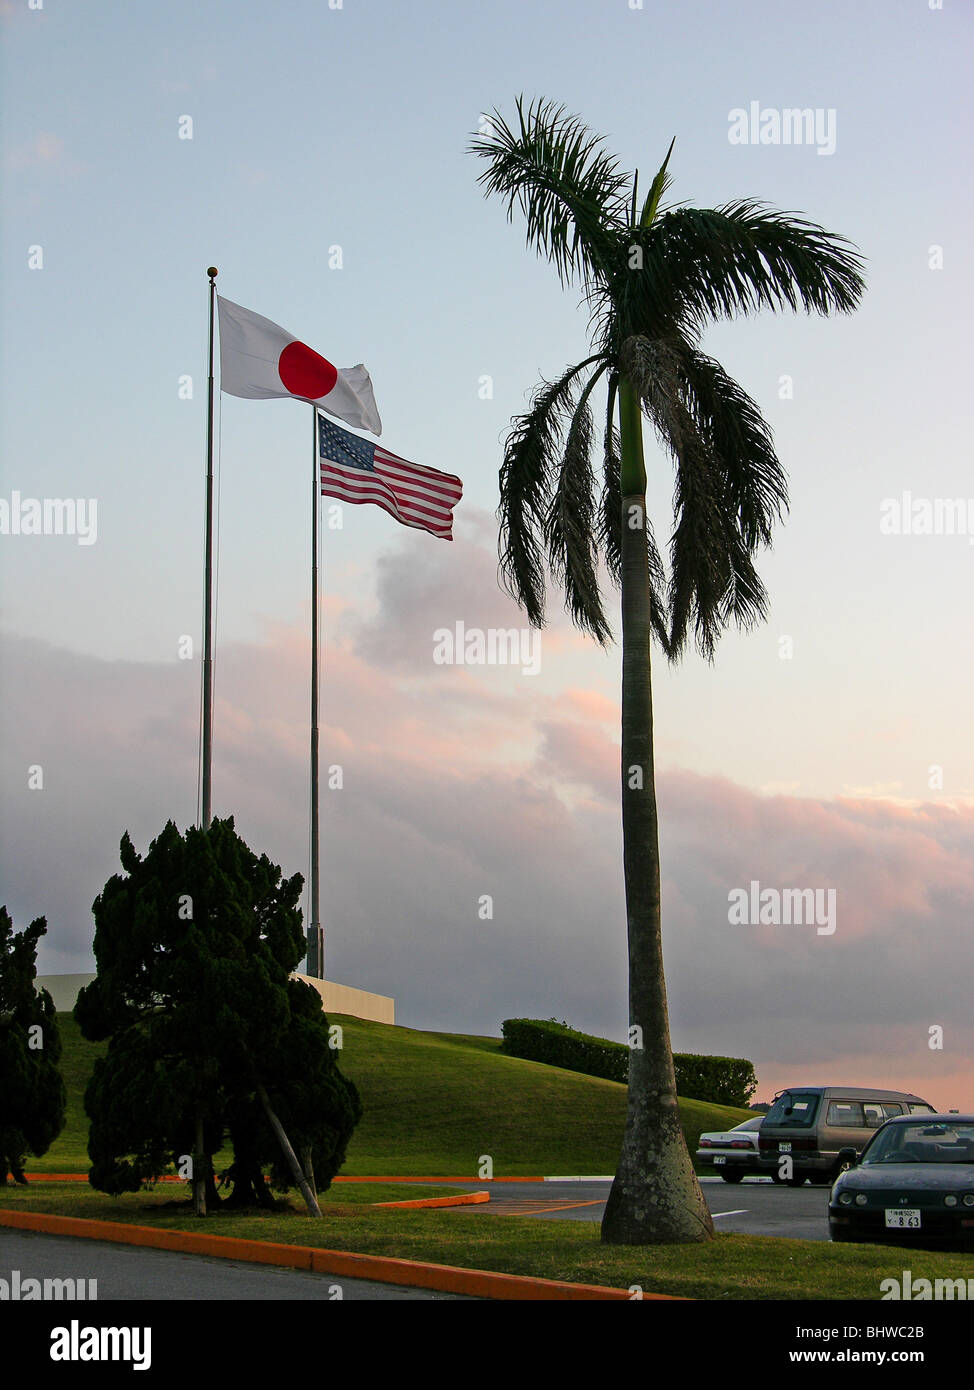 Japanese and American flags flying together in Okinawa, Japan Stock Photo